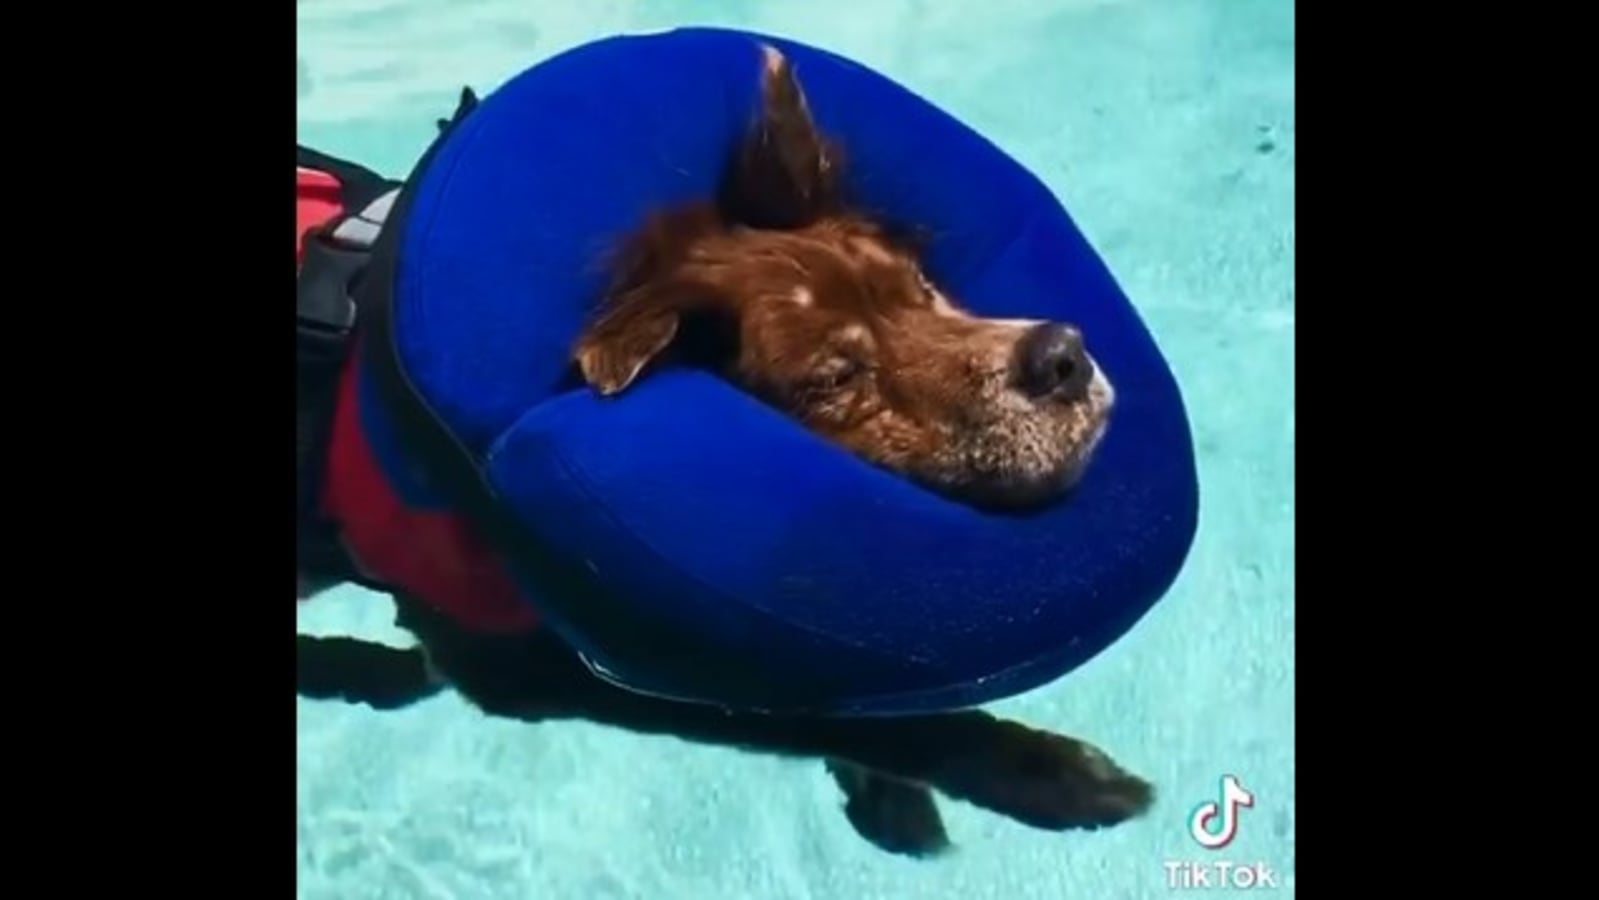 Dogandgirlsxxxvideo - Video of this 16-year-old dog taking a nap while floating in pool is super  sweet | Trending - Hindustan Times